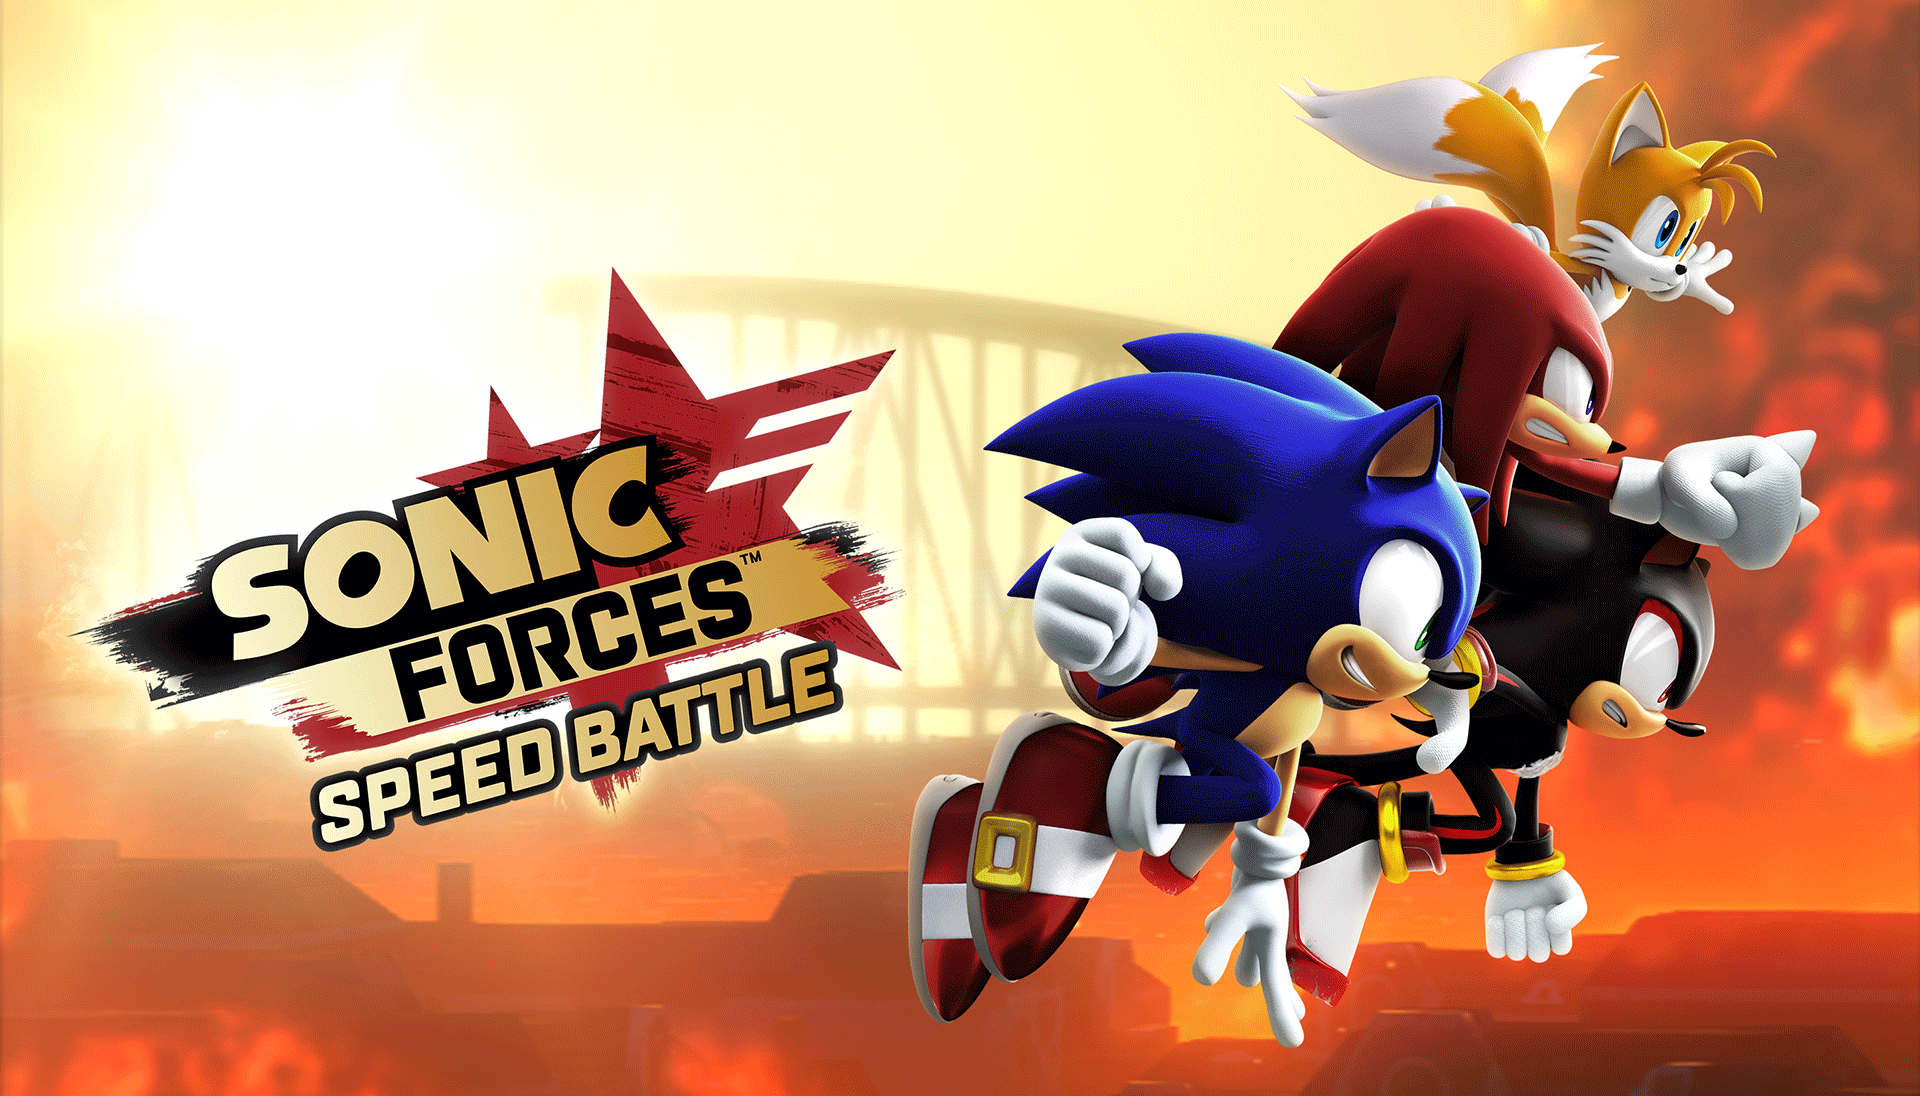 Sonic Forces: Speed Battle is now live worldwide on the Google